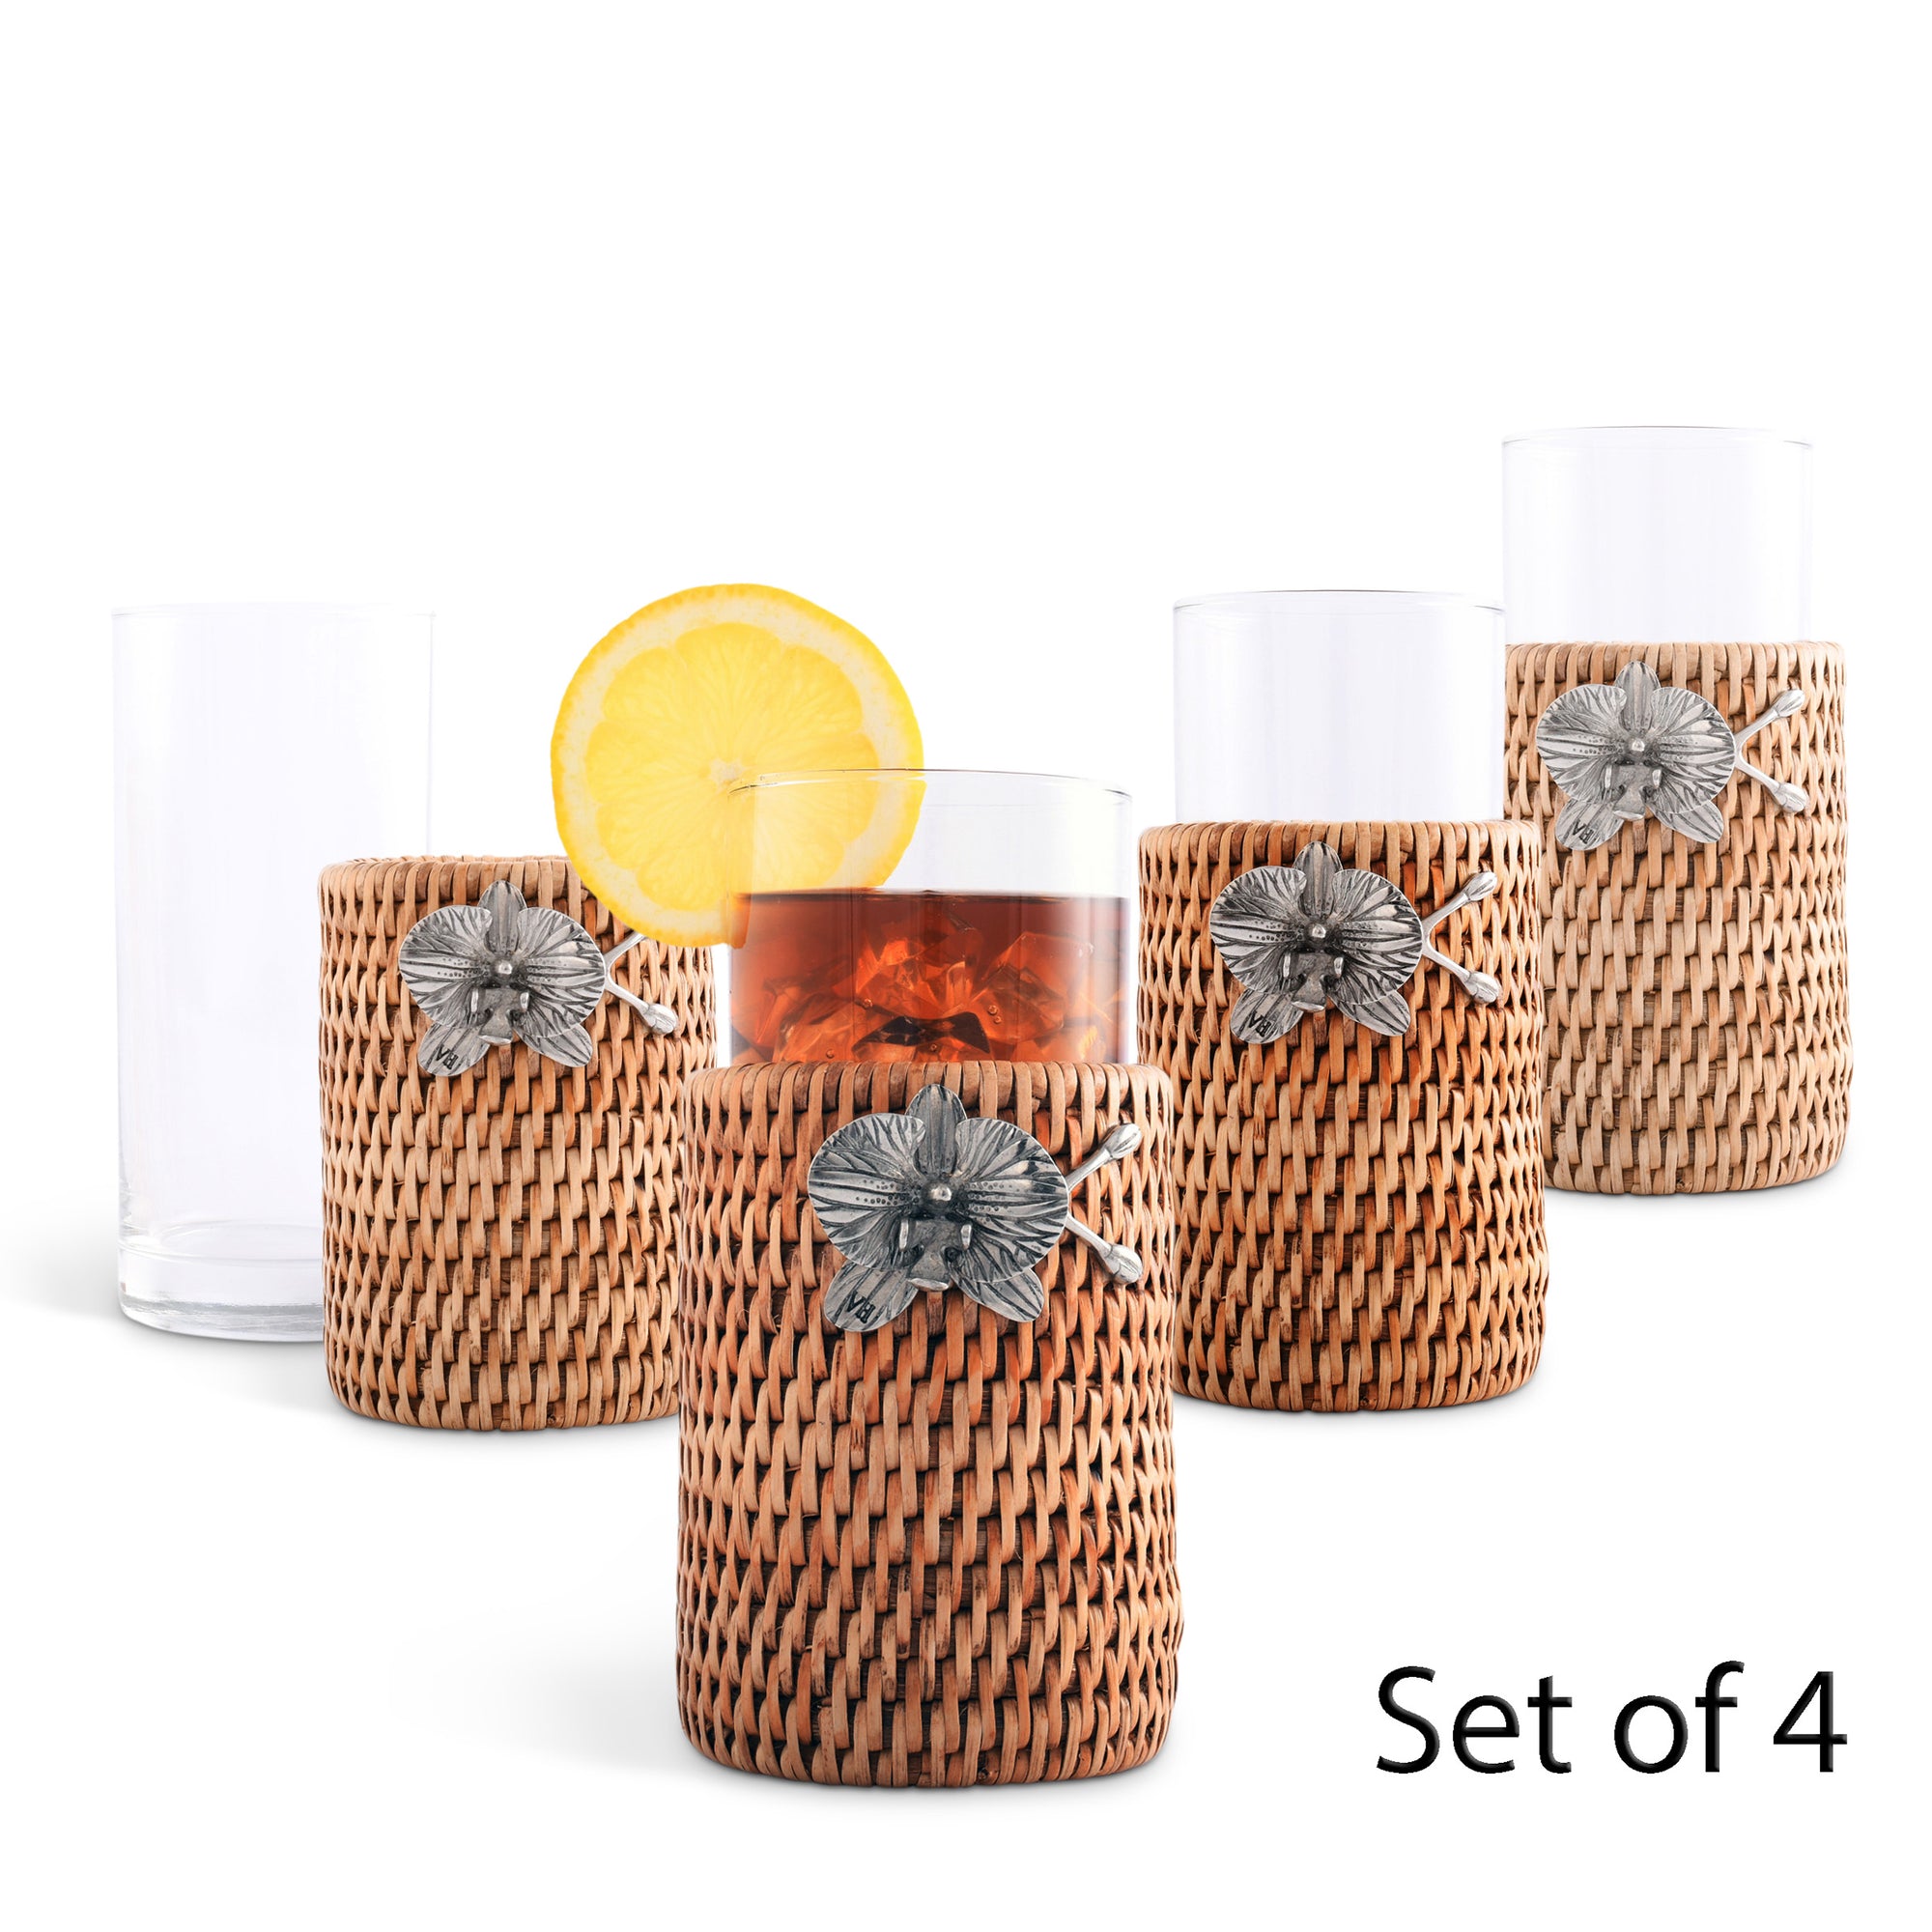 Vagabond House Orchid Drinking Glass Covered with Hand Woven Wicker Rattan - Set of 4 Product Image